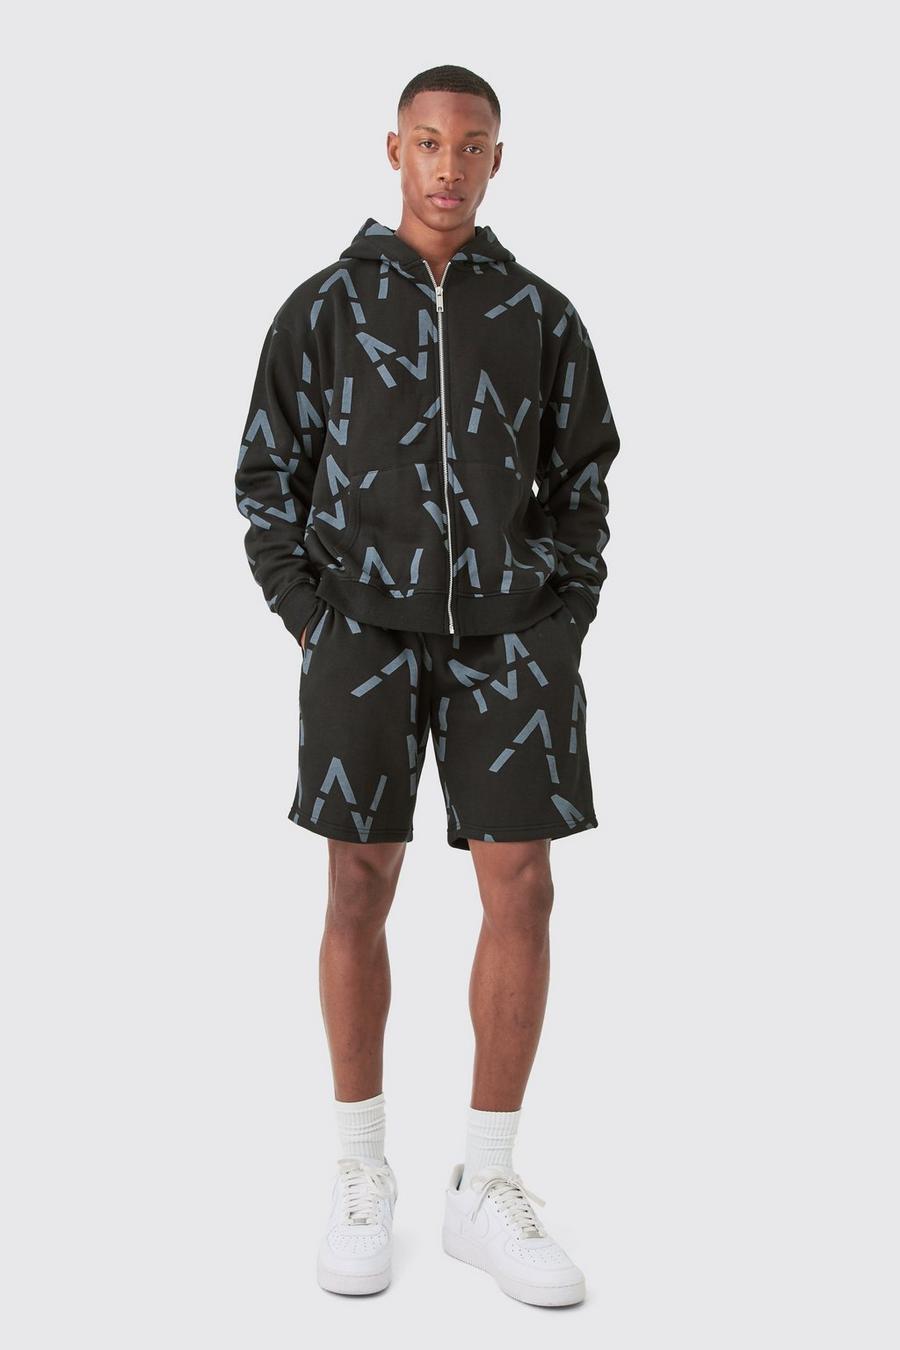 Black  Oversized Boxy Man All Over Print Zip Hoodie Short Tracksuit